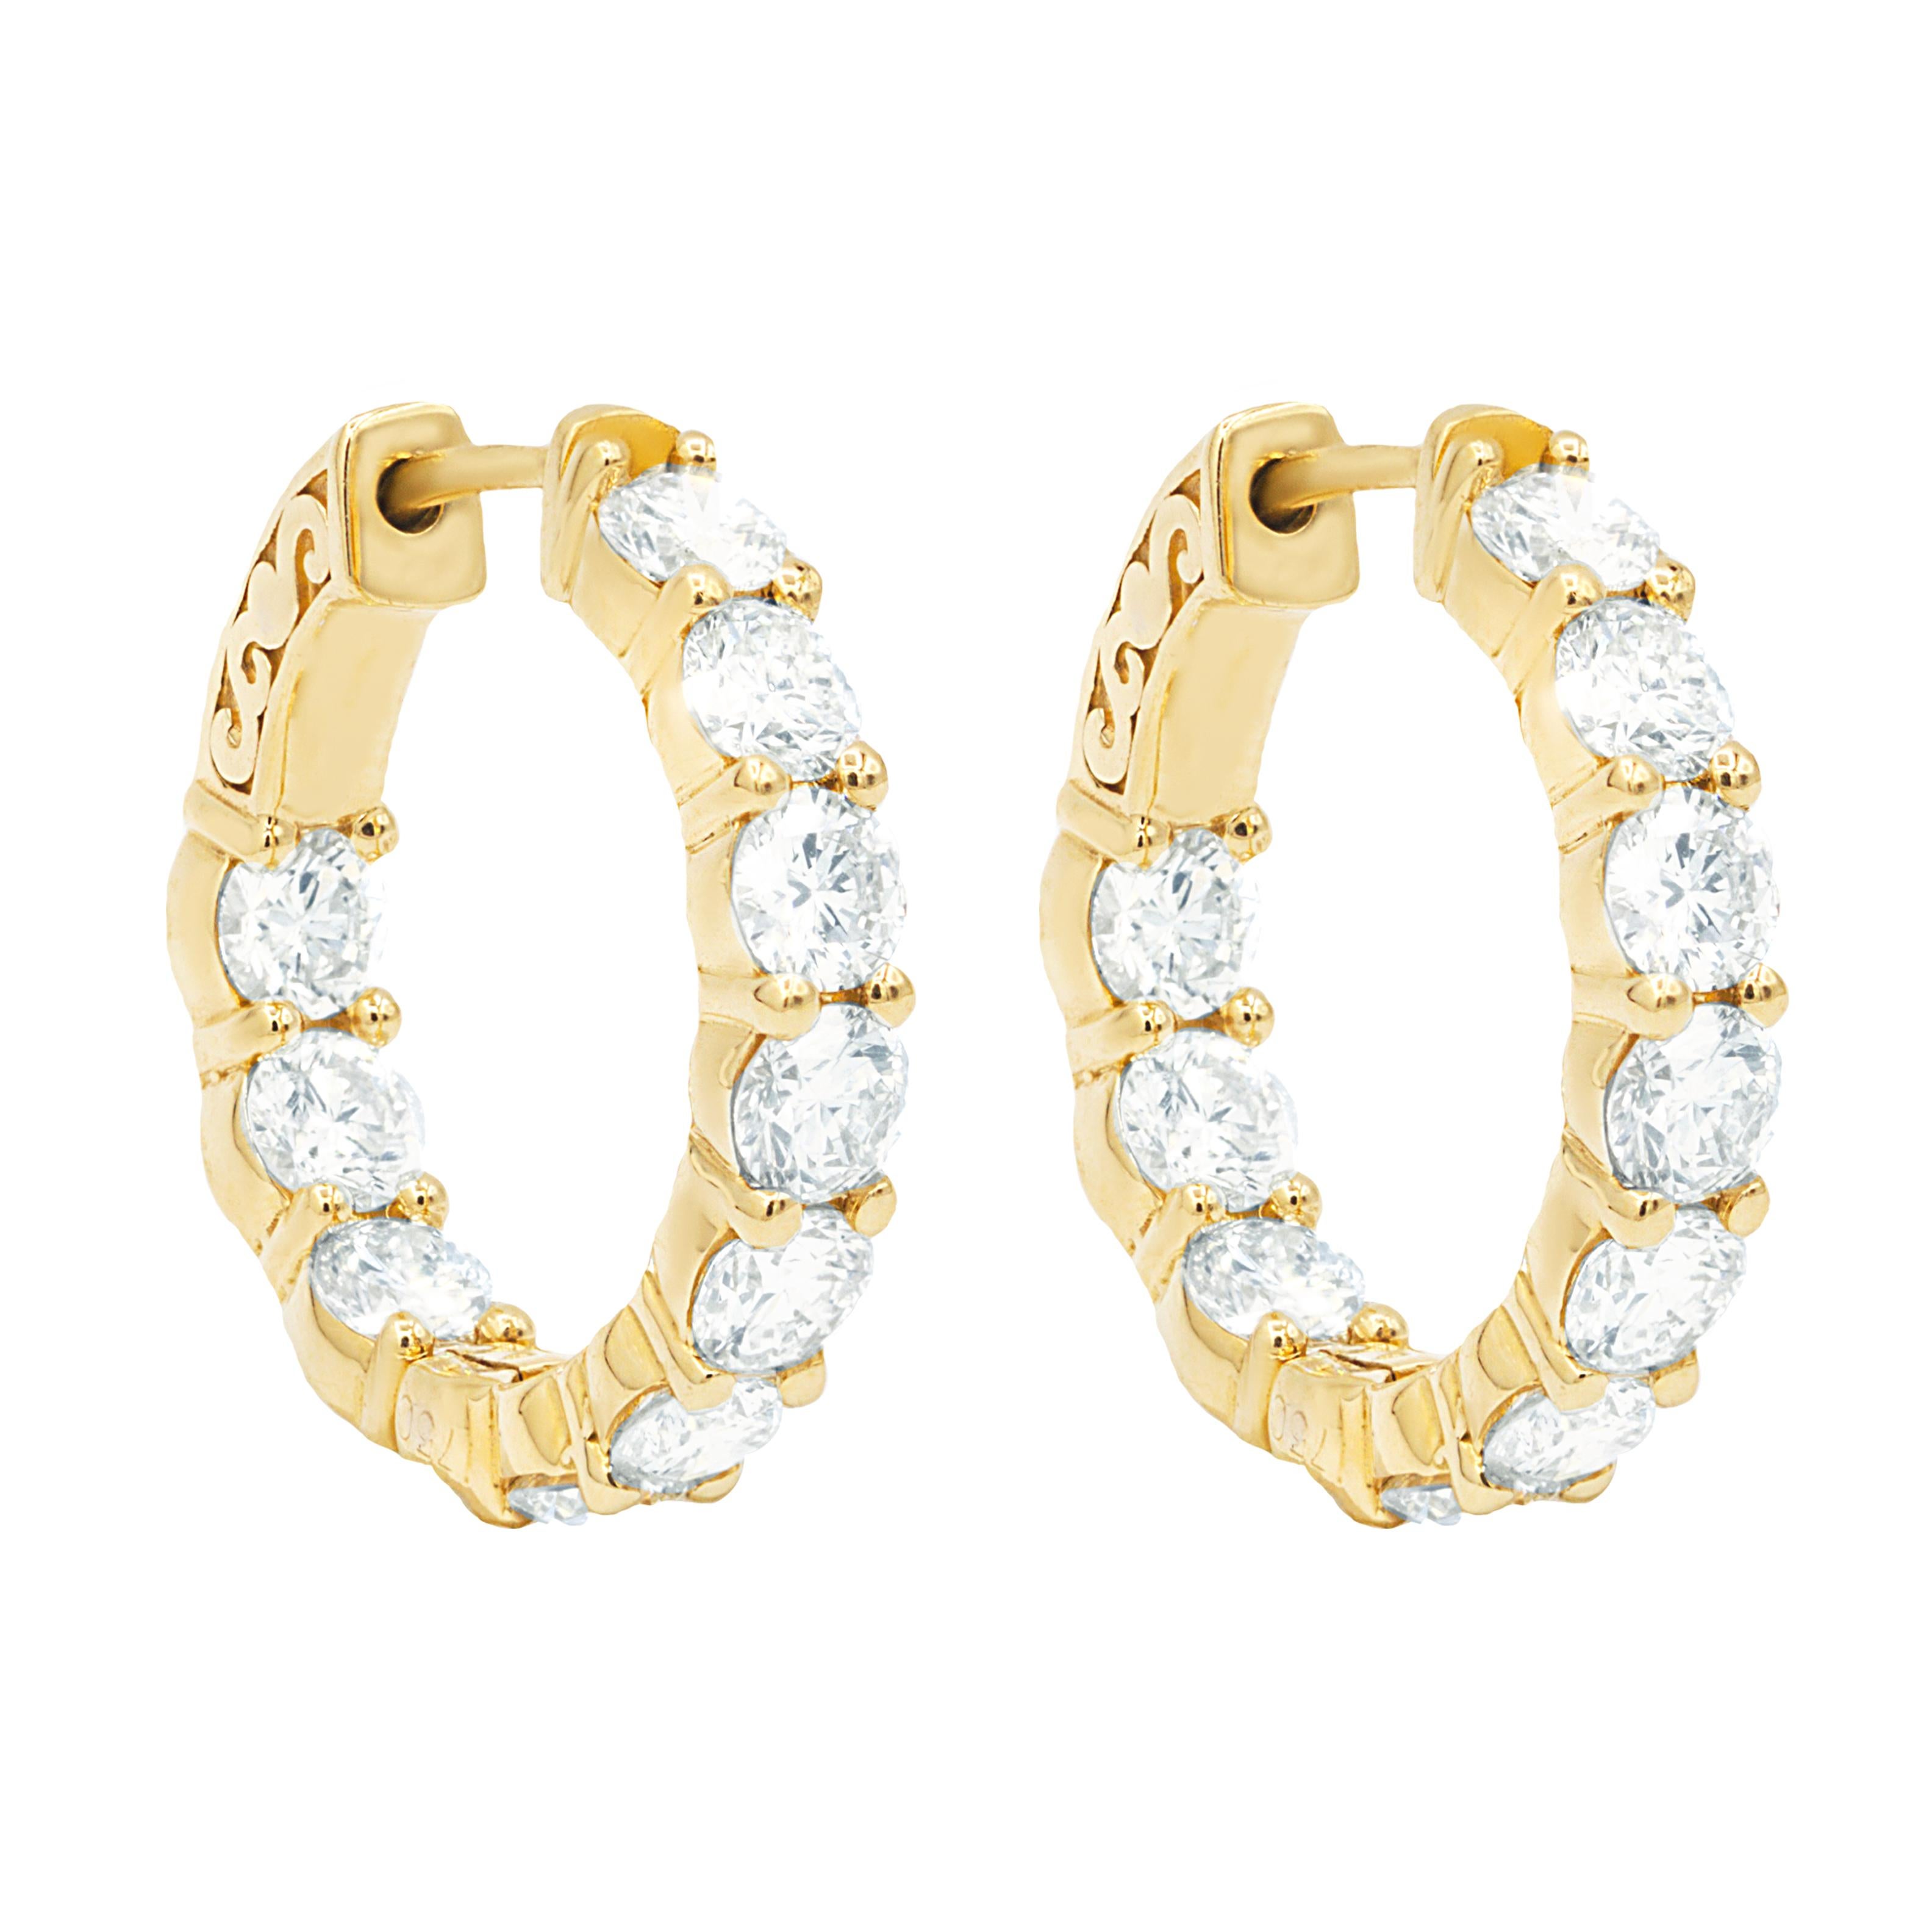 18 kt yellow gold inside-out hoop earrings adorned with 4.05 cts tw of round diamonds (24 stones)
Diana M. is a leading supplier of top-quality fine jewelry for over 35 years.
Diana M is one-stop shop for all your jewelry shopping, carrying line of